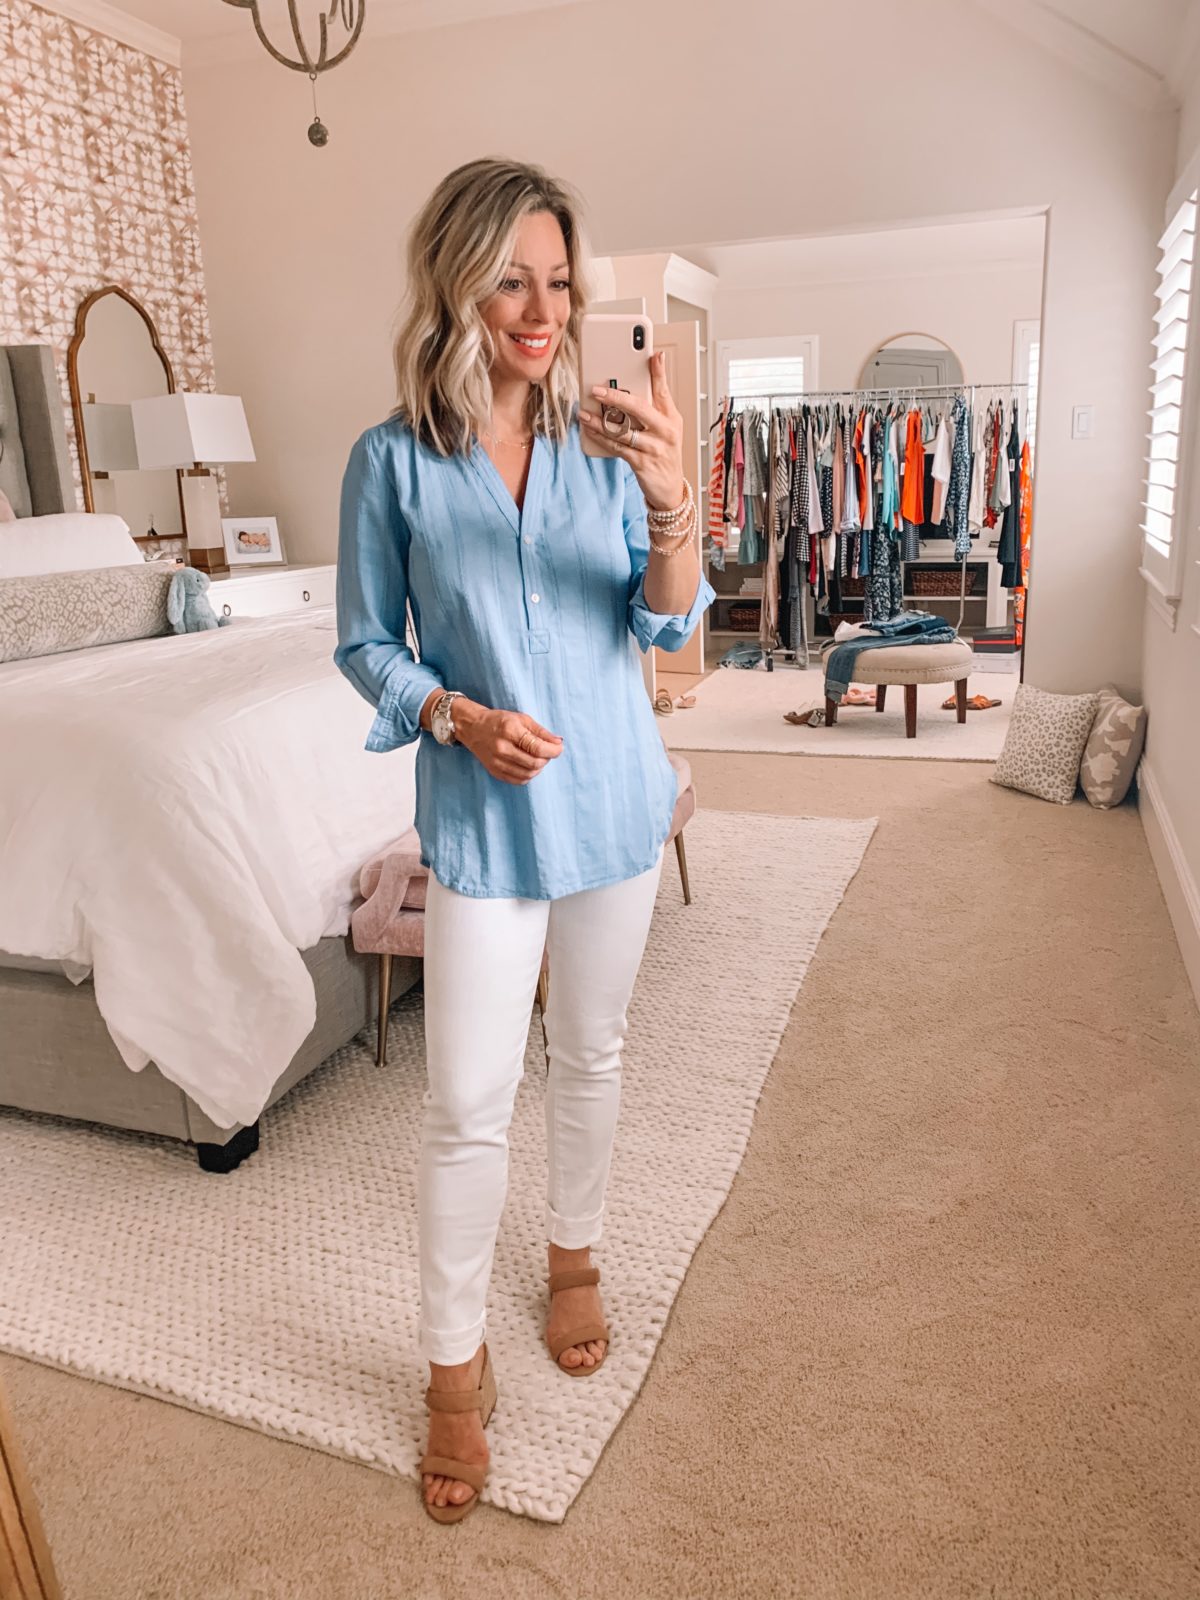 Tunic Top and white jeans